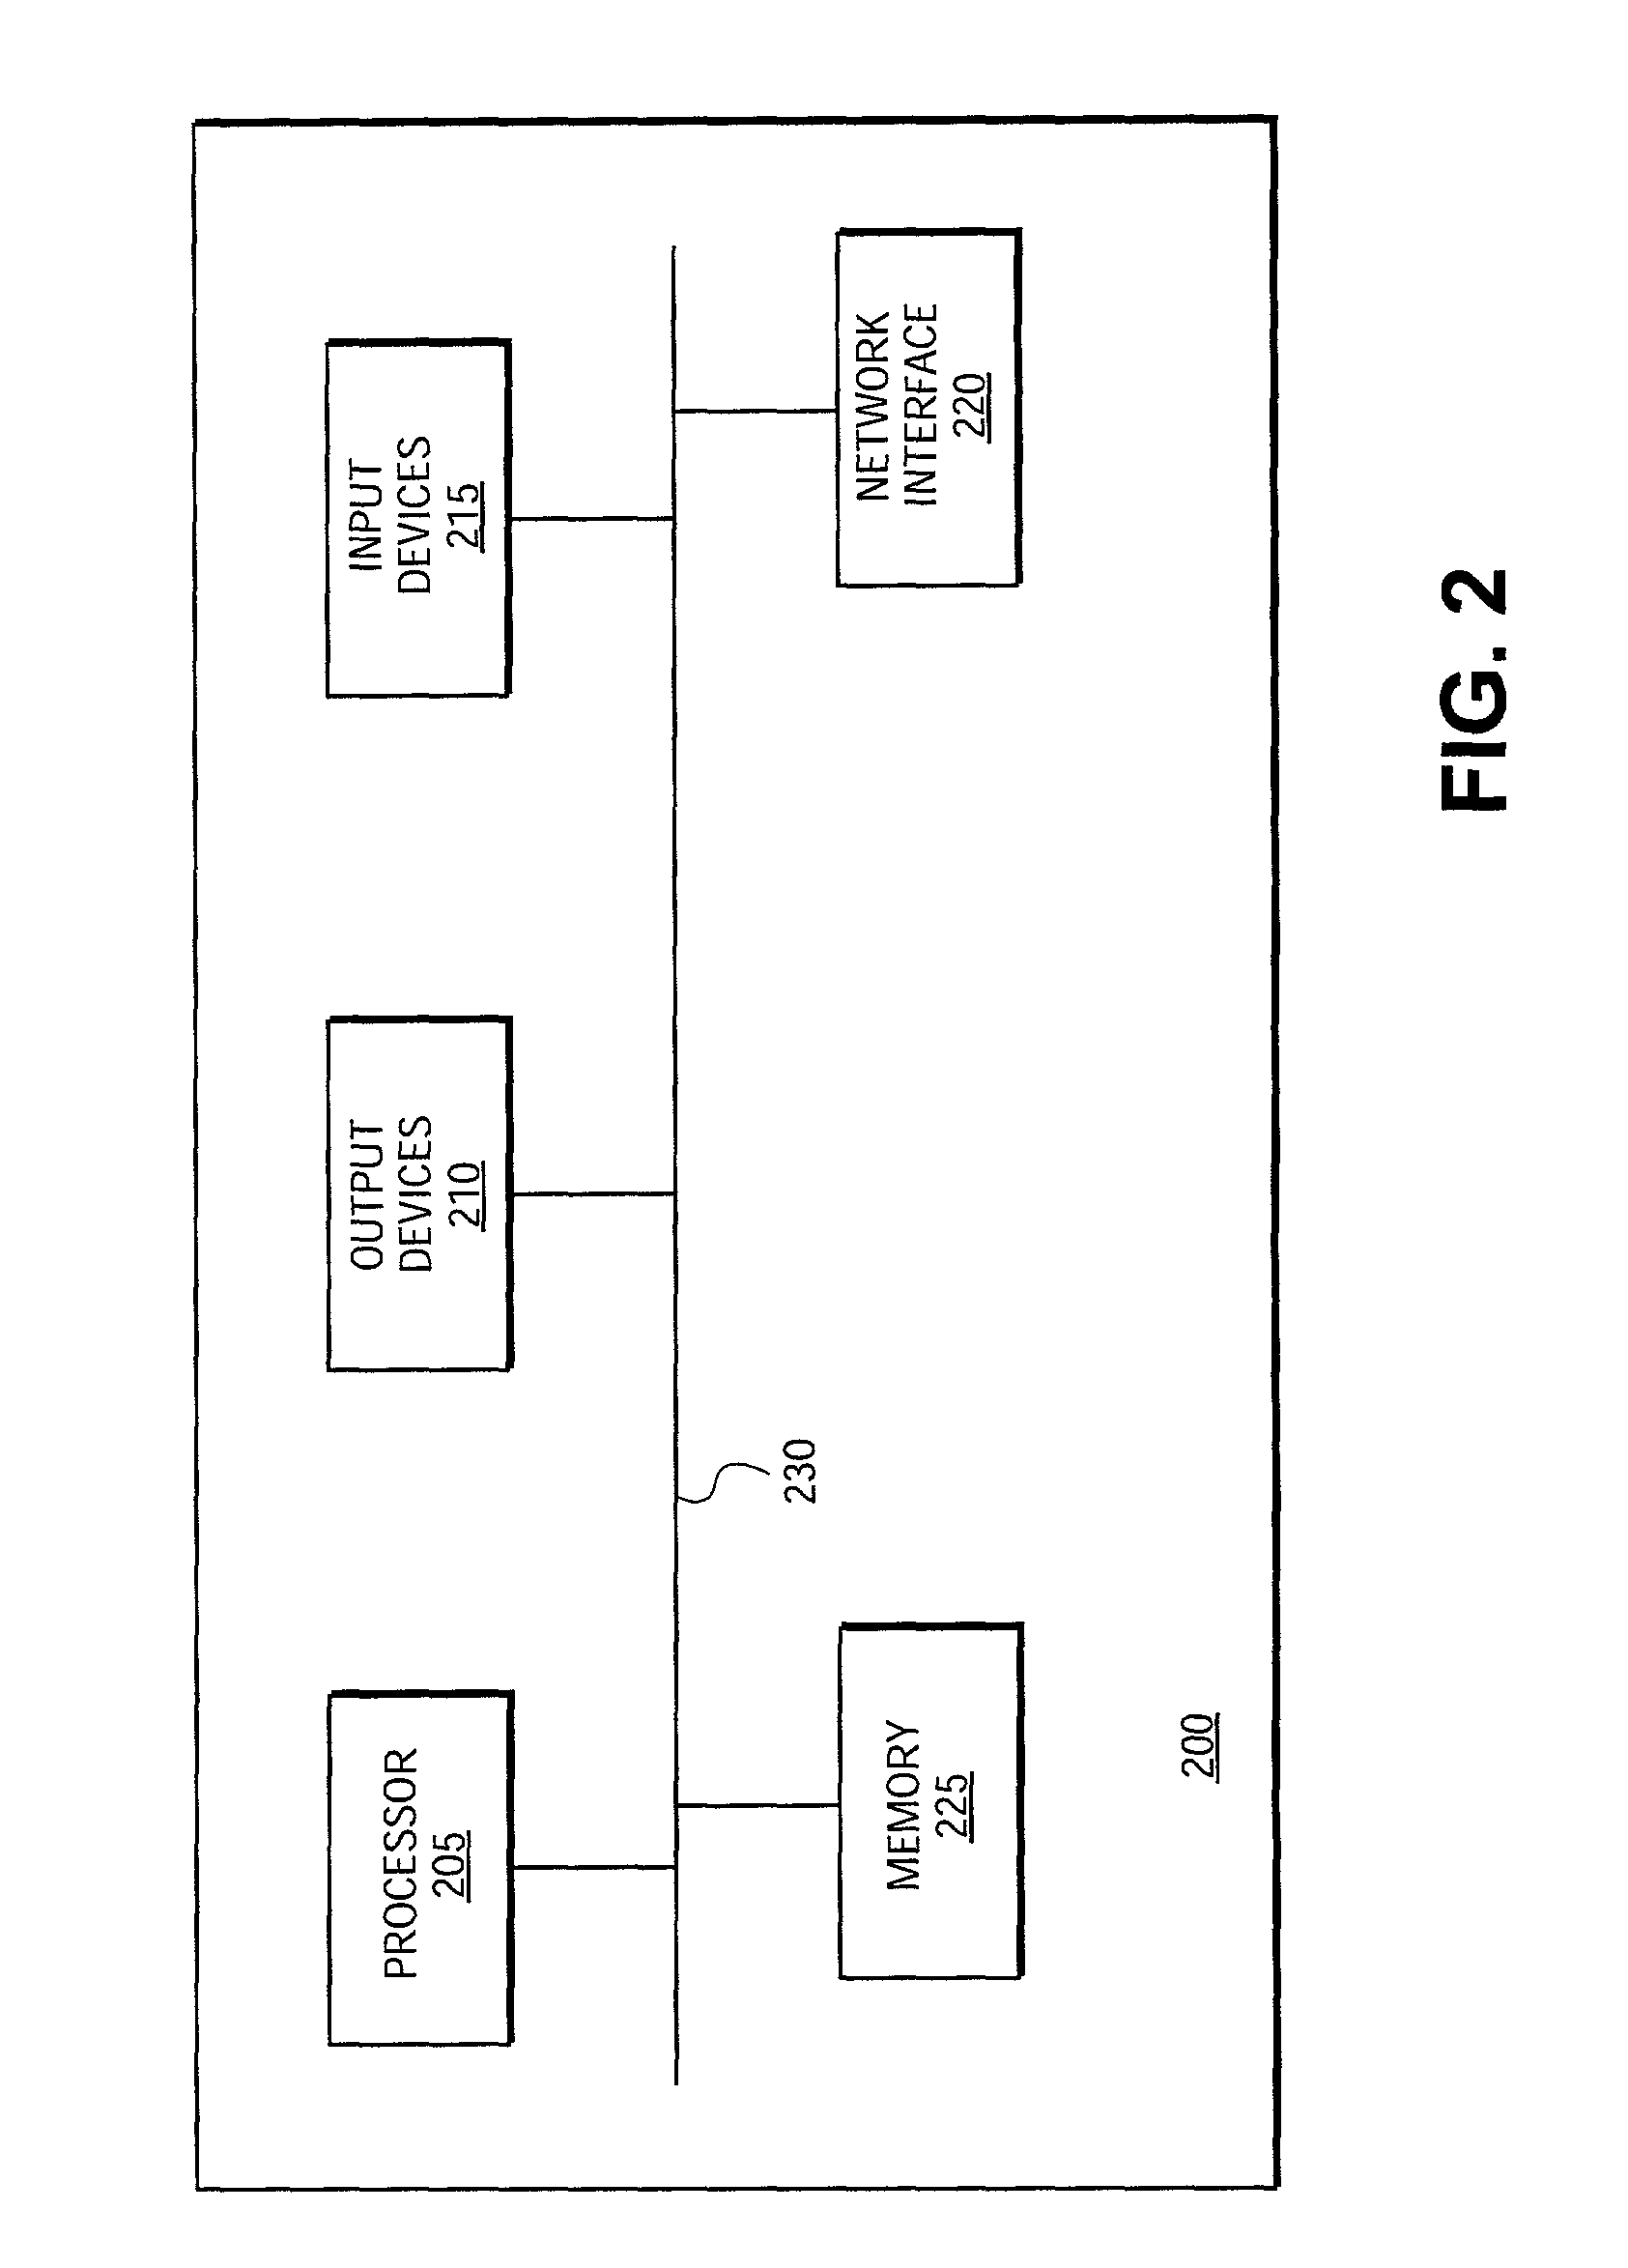 Method and apparatus for implementing a speech interface for a GUI